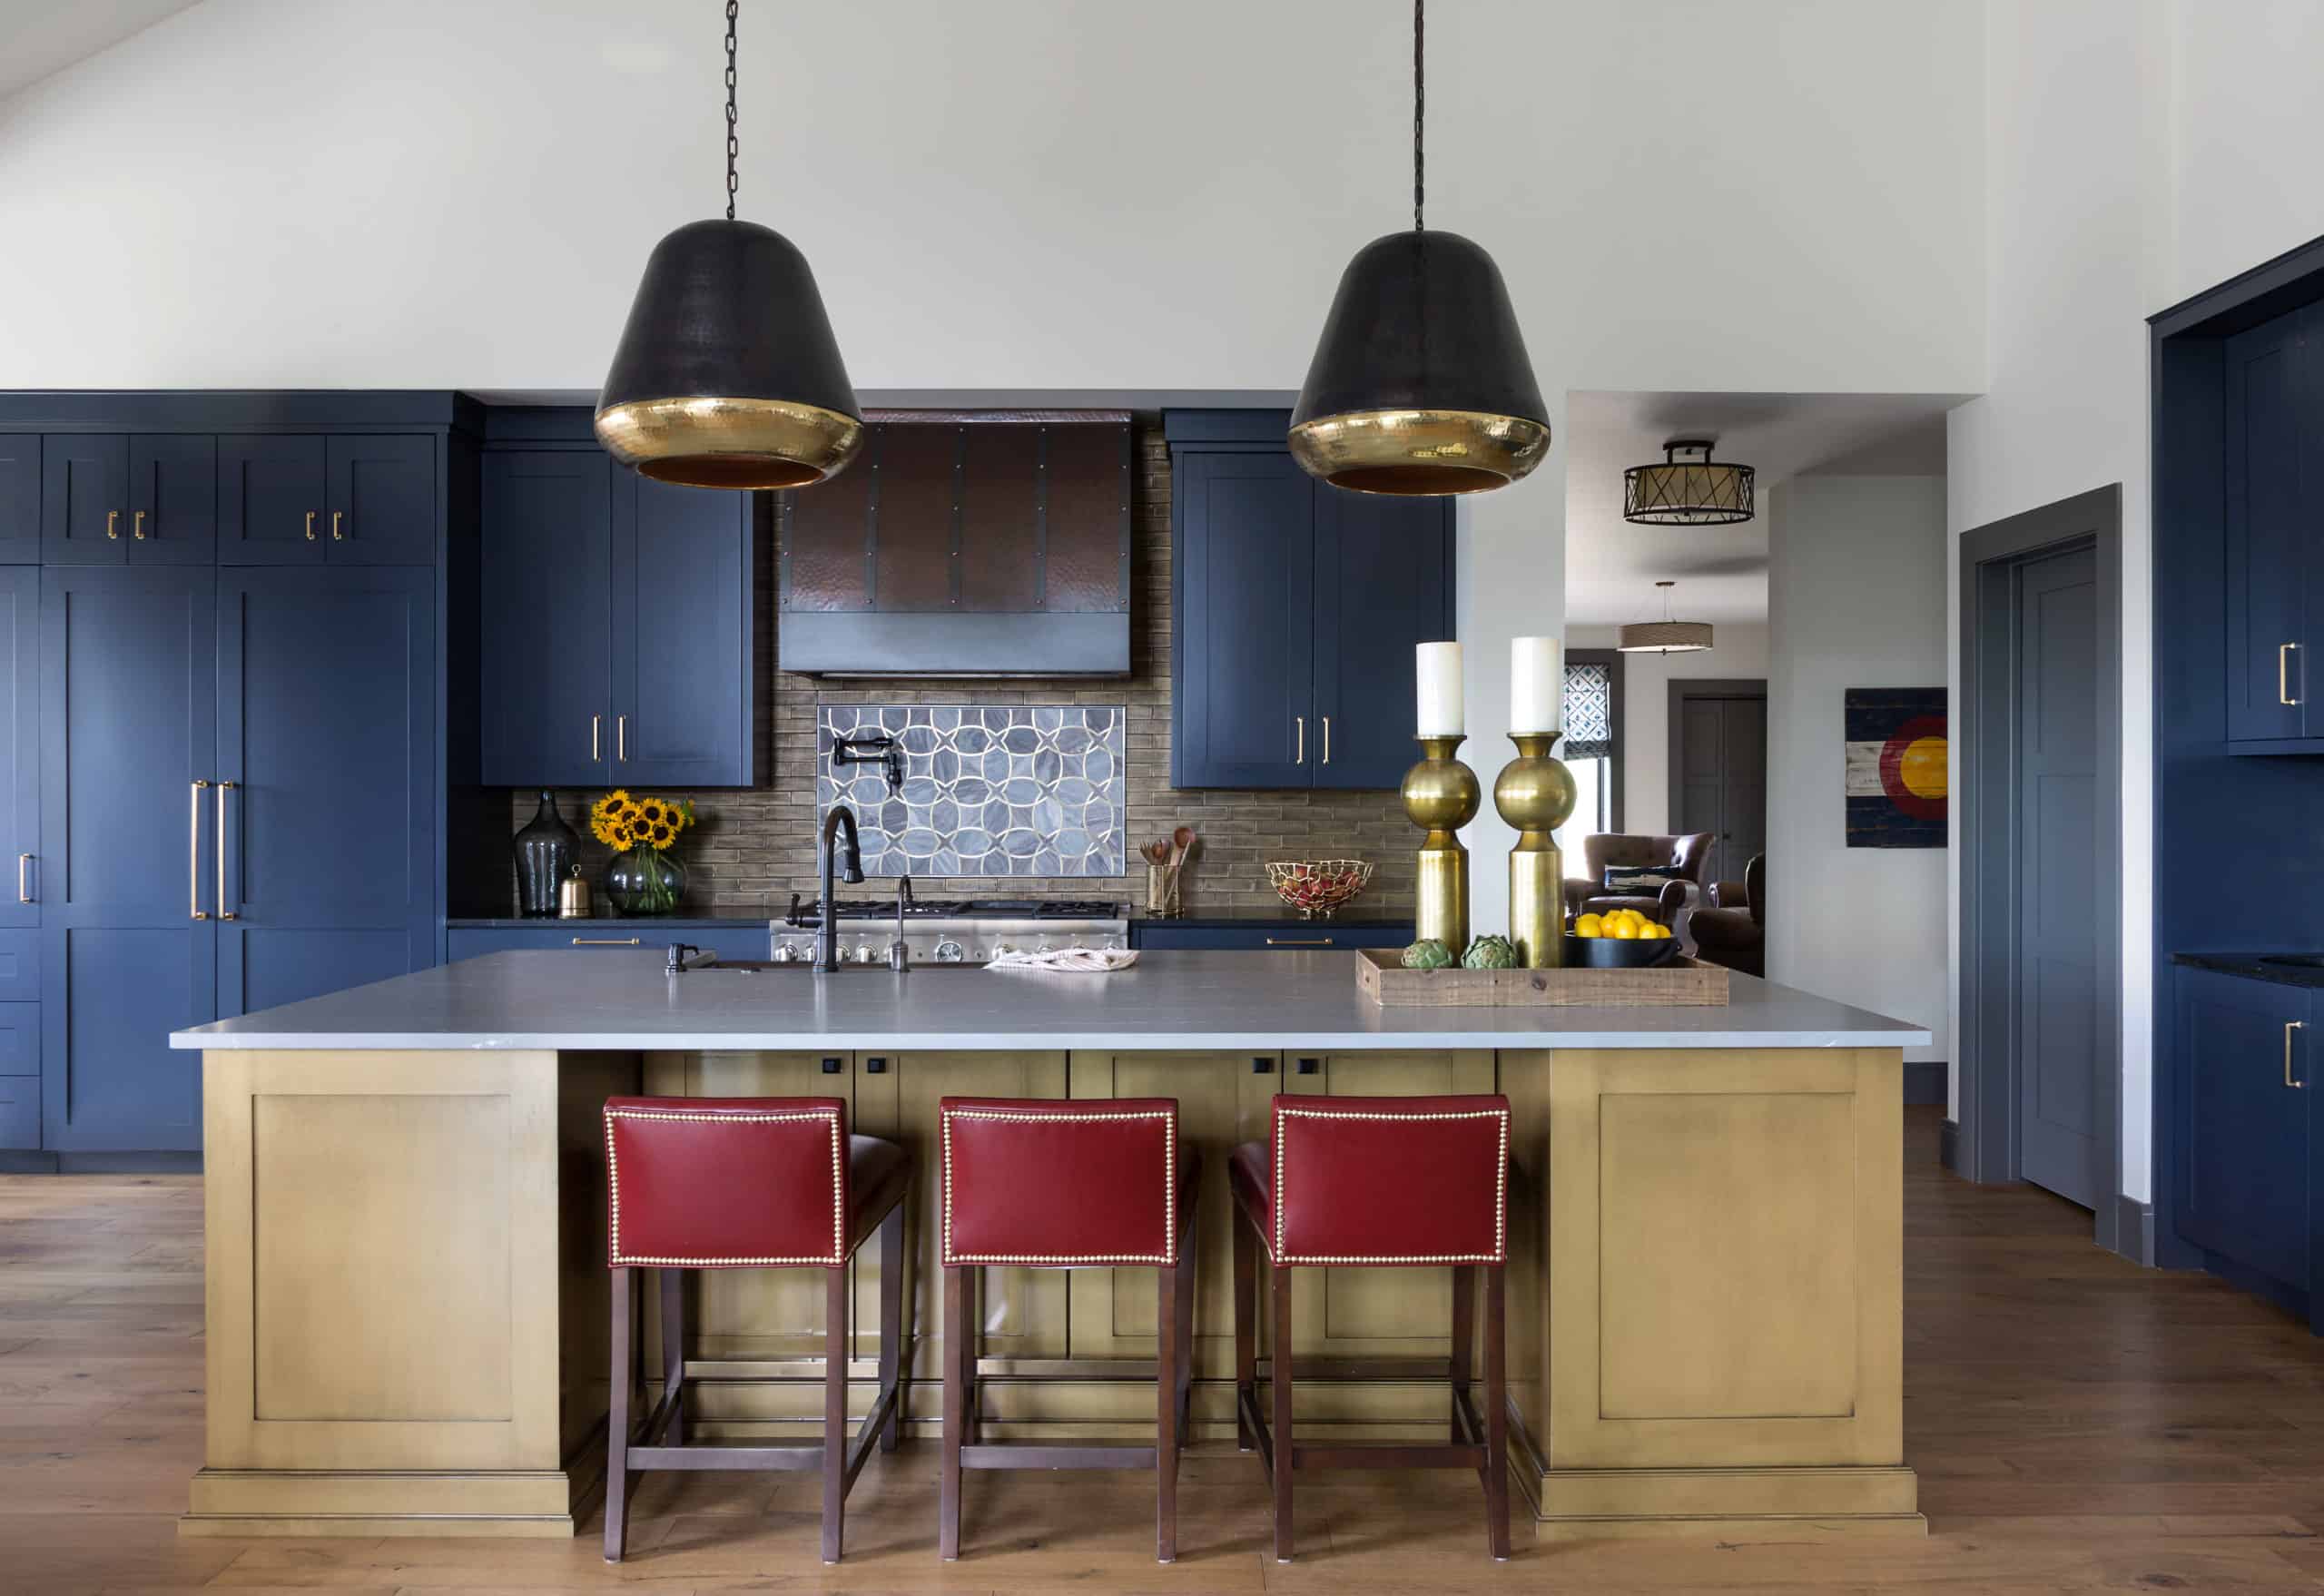 Navy cabinets and red leather stools with huge kitchen pendants by Andrea Schumacher Interior Design